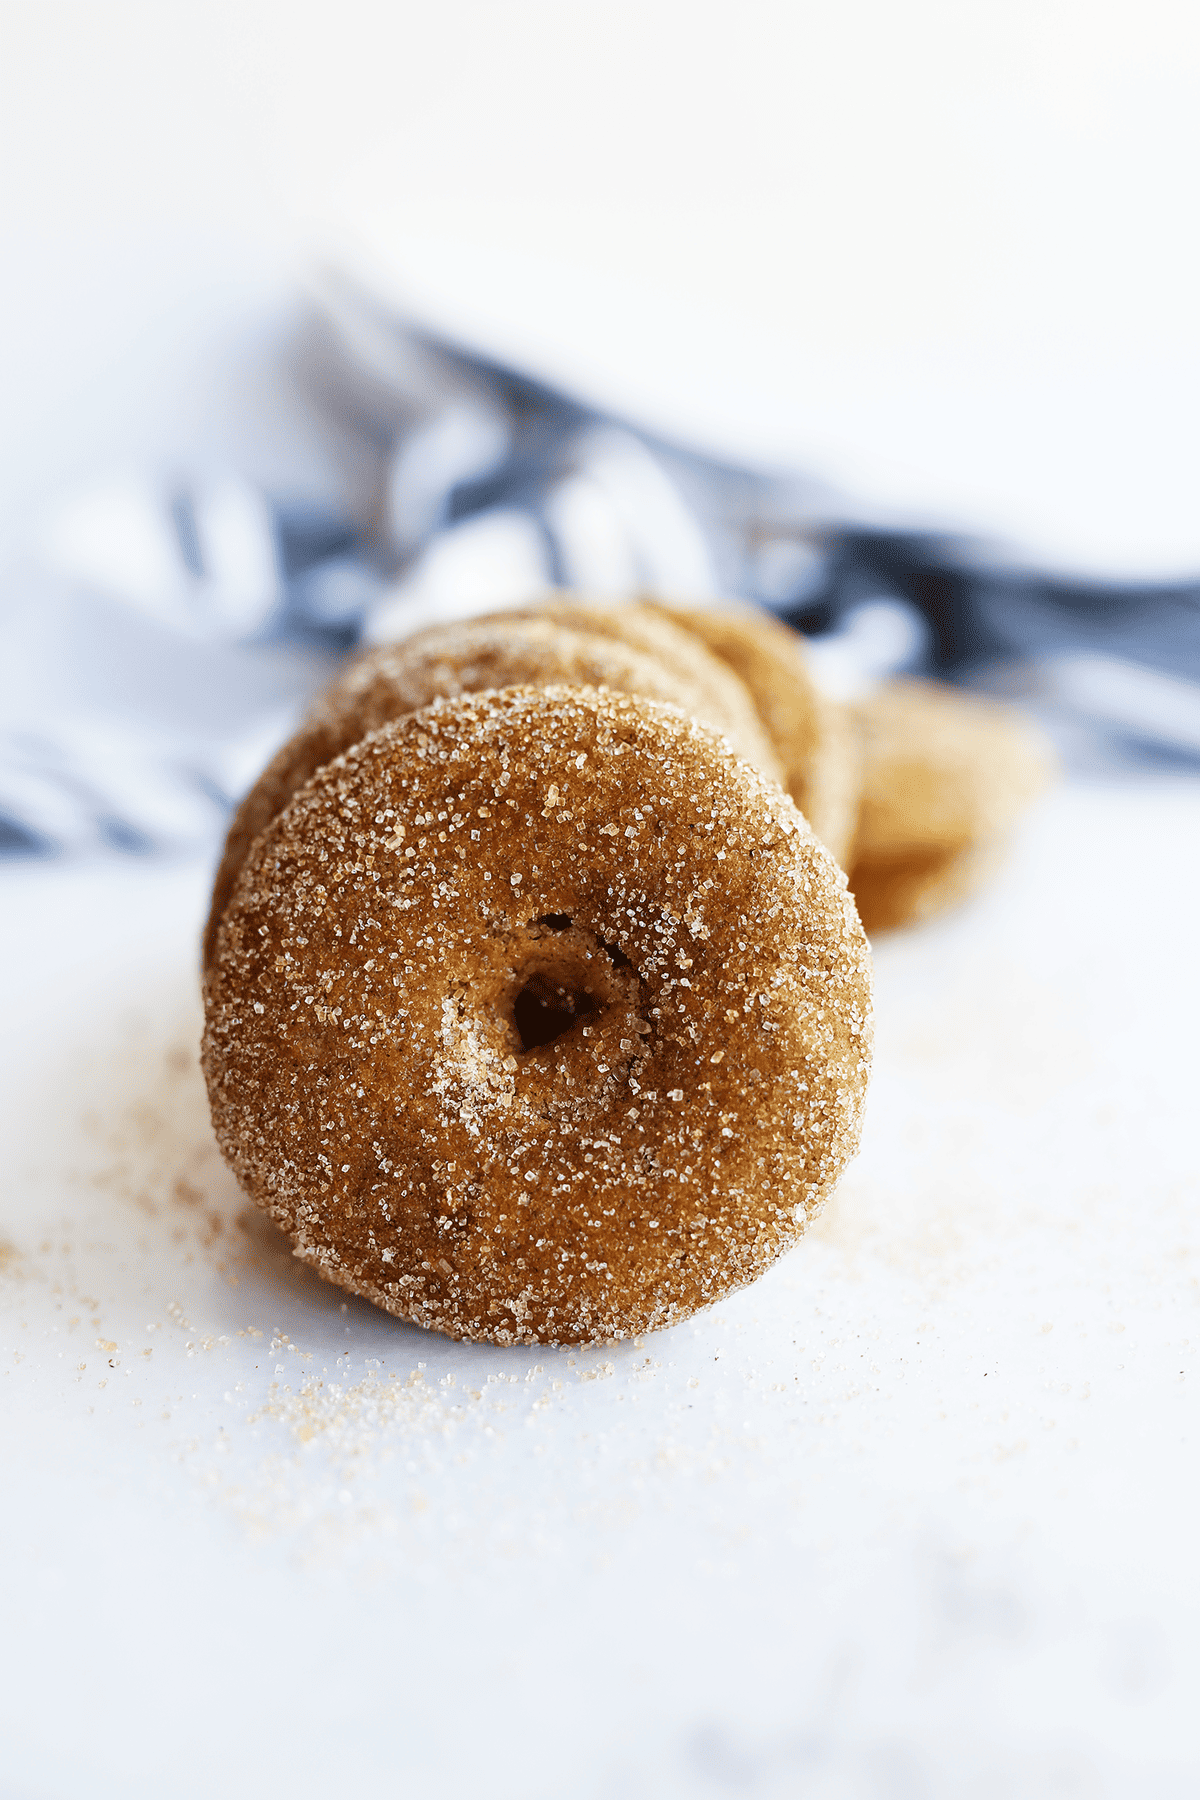 These homemade baked Apple Cider Donuts are vegan and sure easy plus delicious! They are coated in cinnamon sugar and sure to make the house smell amazing.